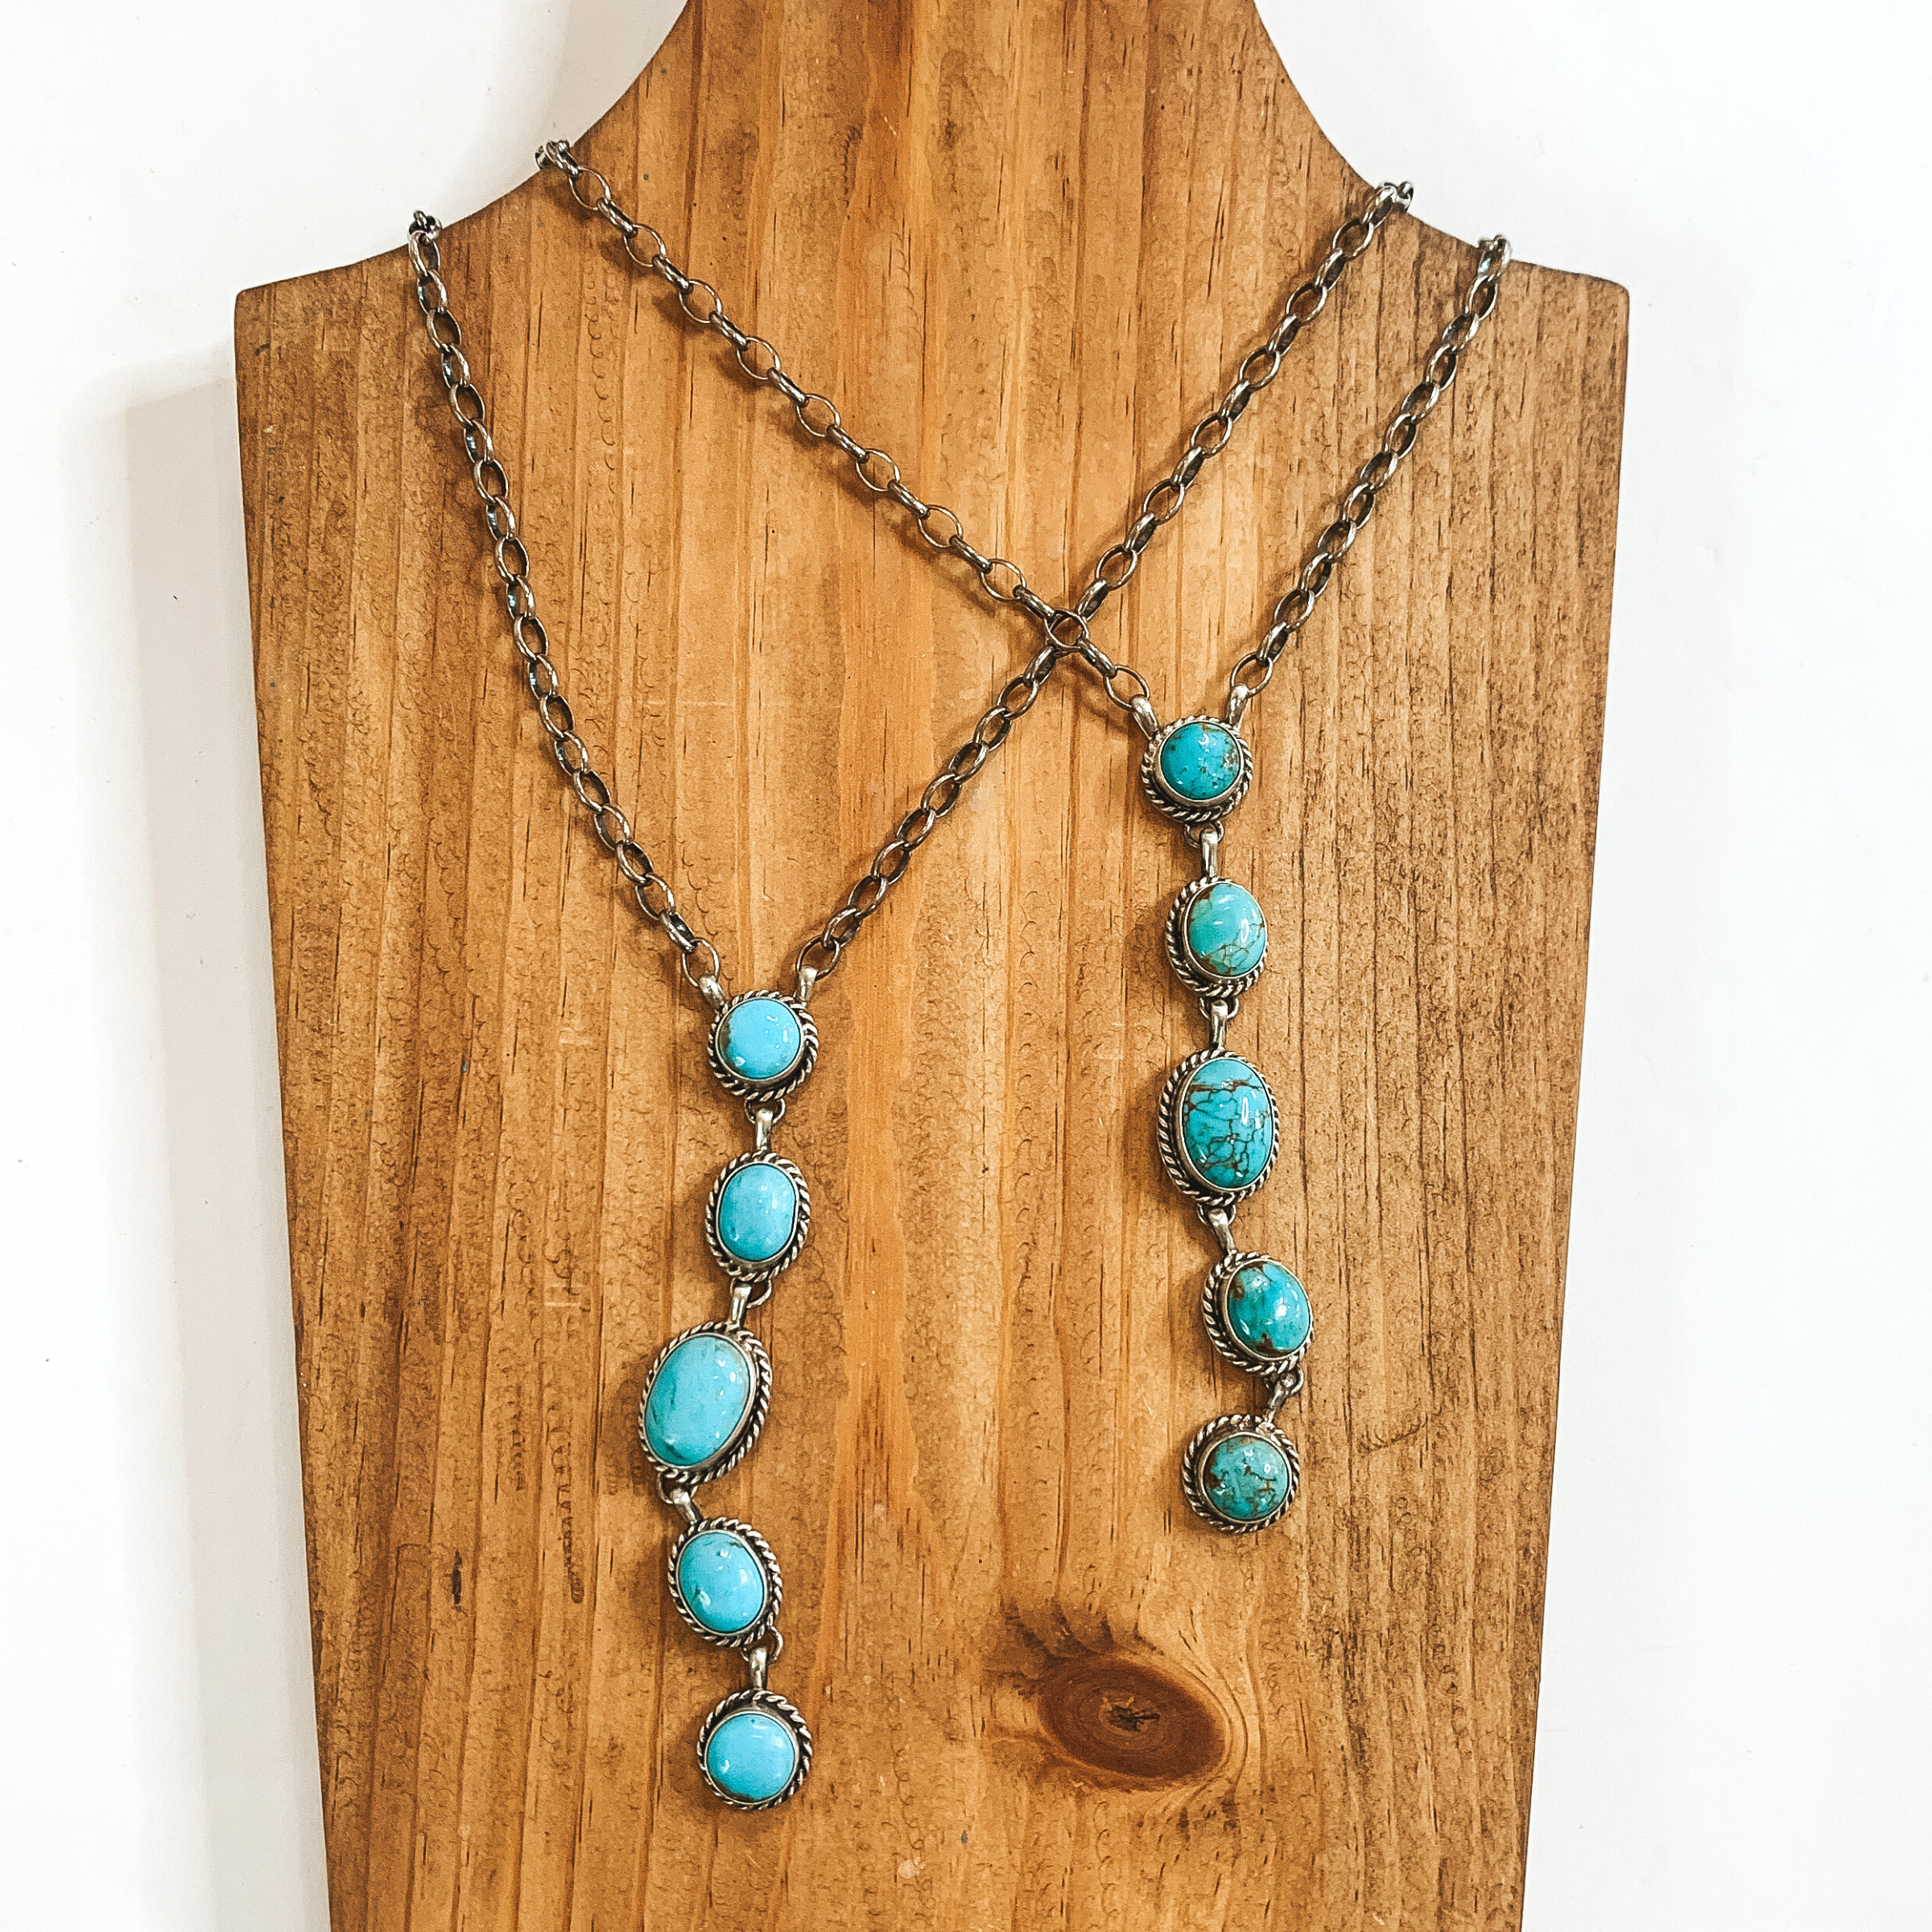 Paperclip chain necklace with five turquoise stone pendants hanging down from the center. There are two necklaces pictured on a wood necklace holder on a white background. 